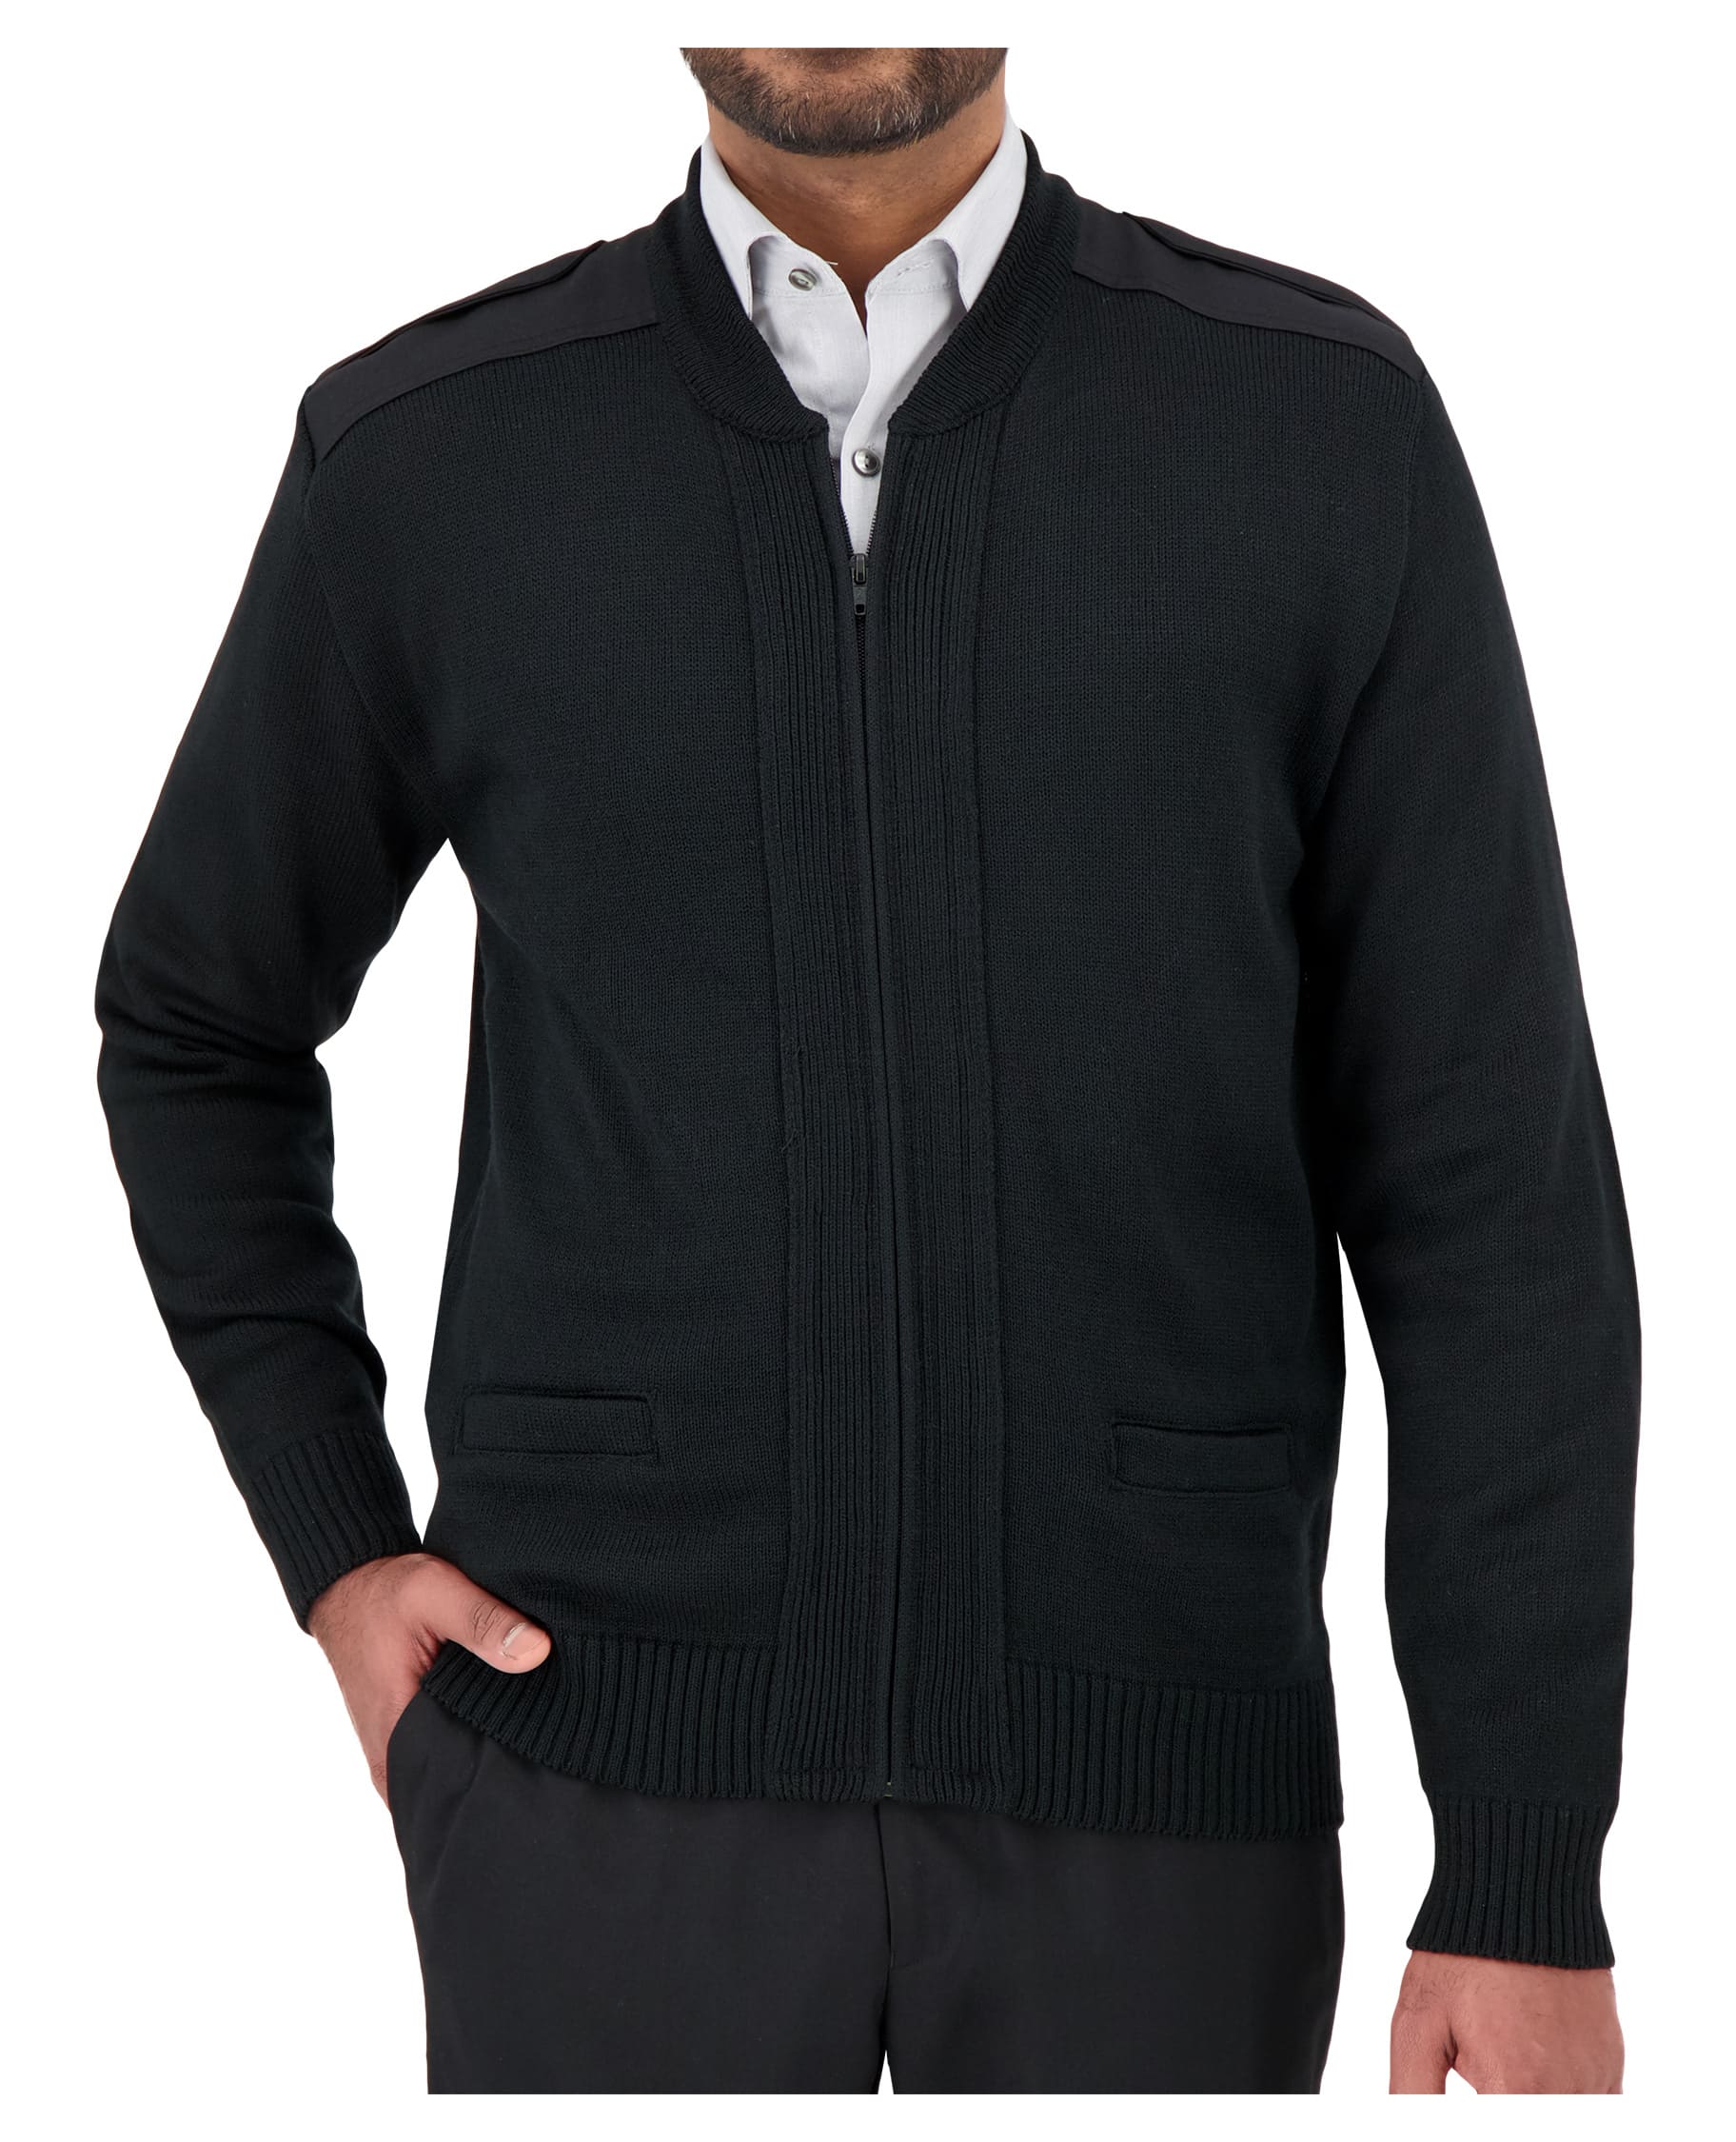 black full zip knit sweater with pockets and shoulder patches